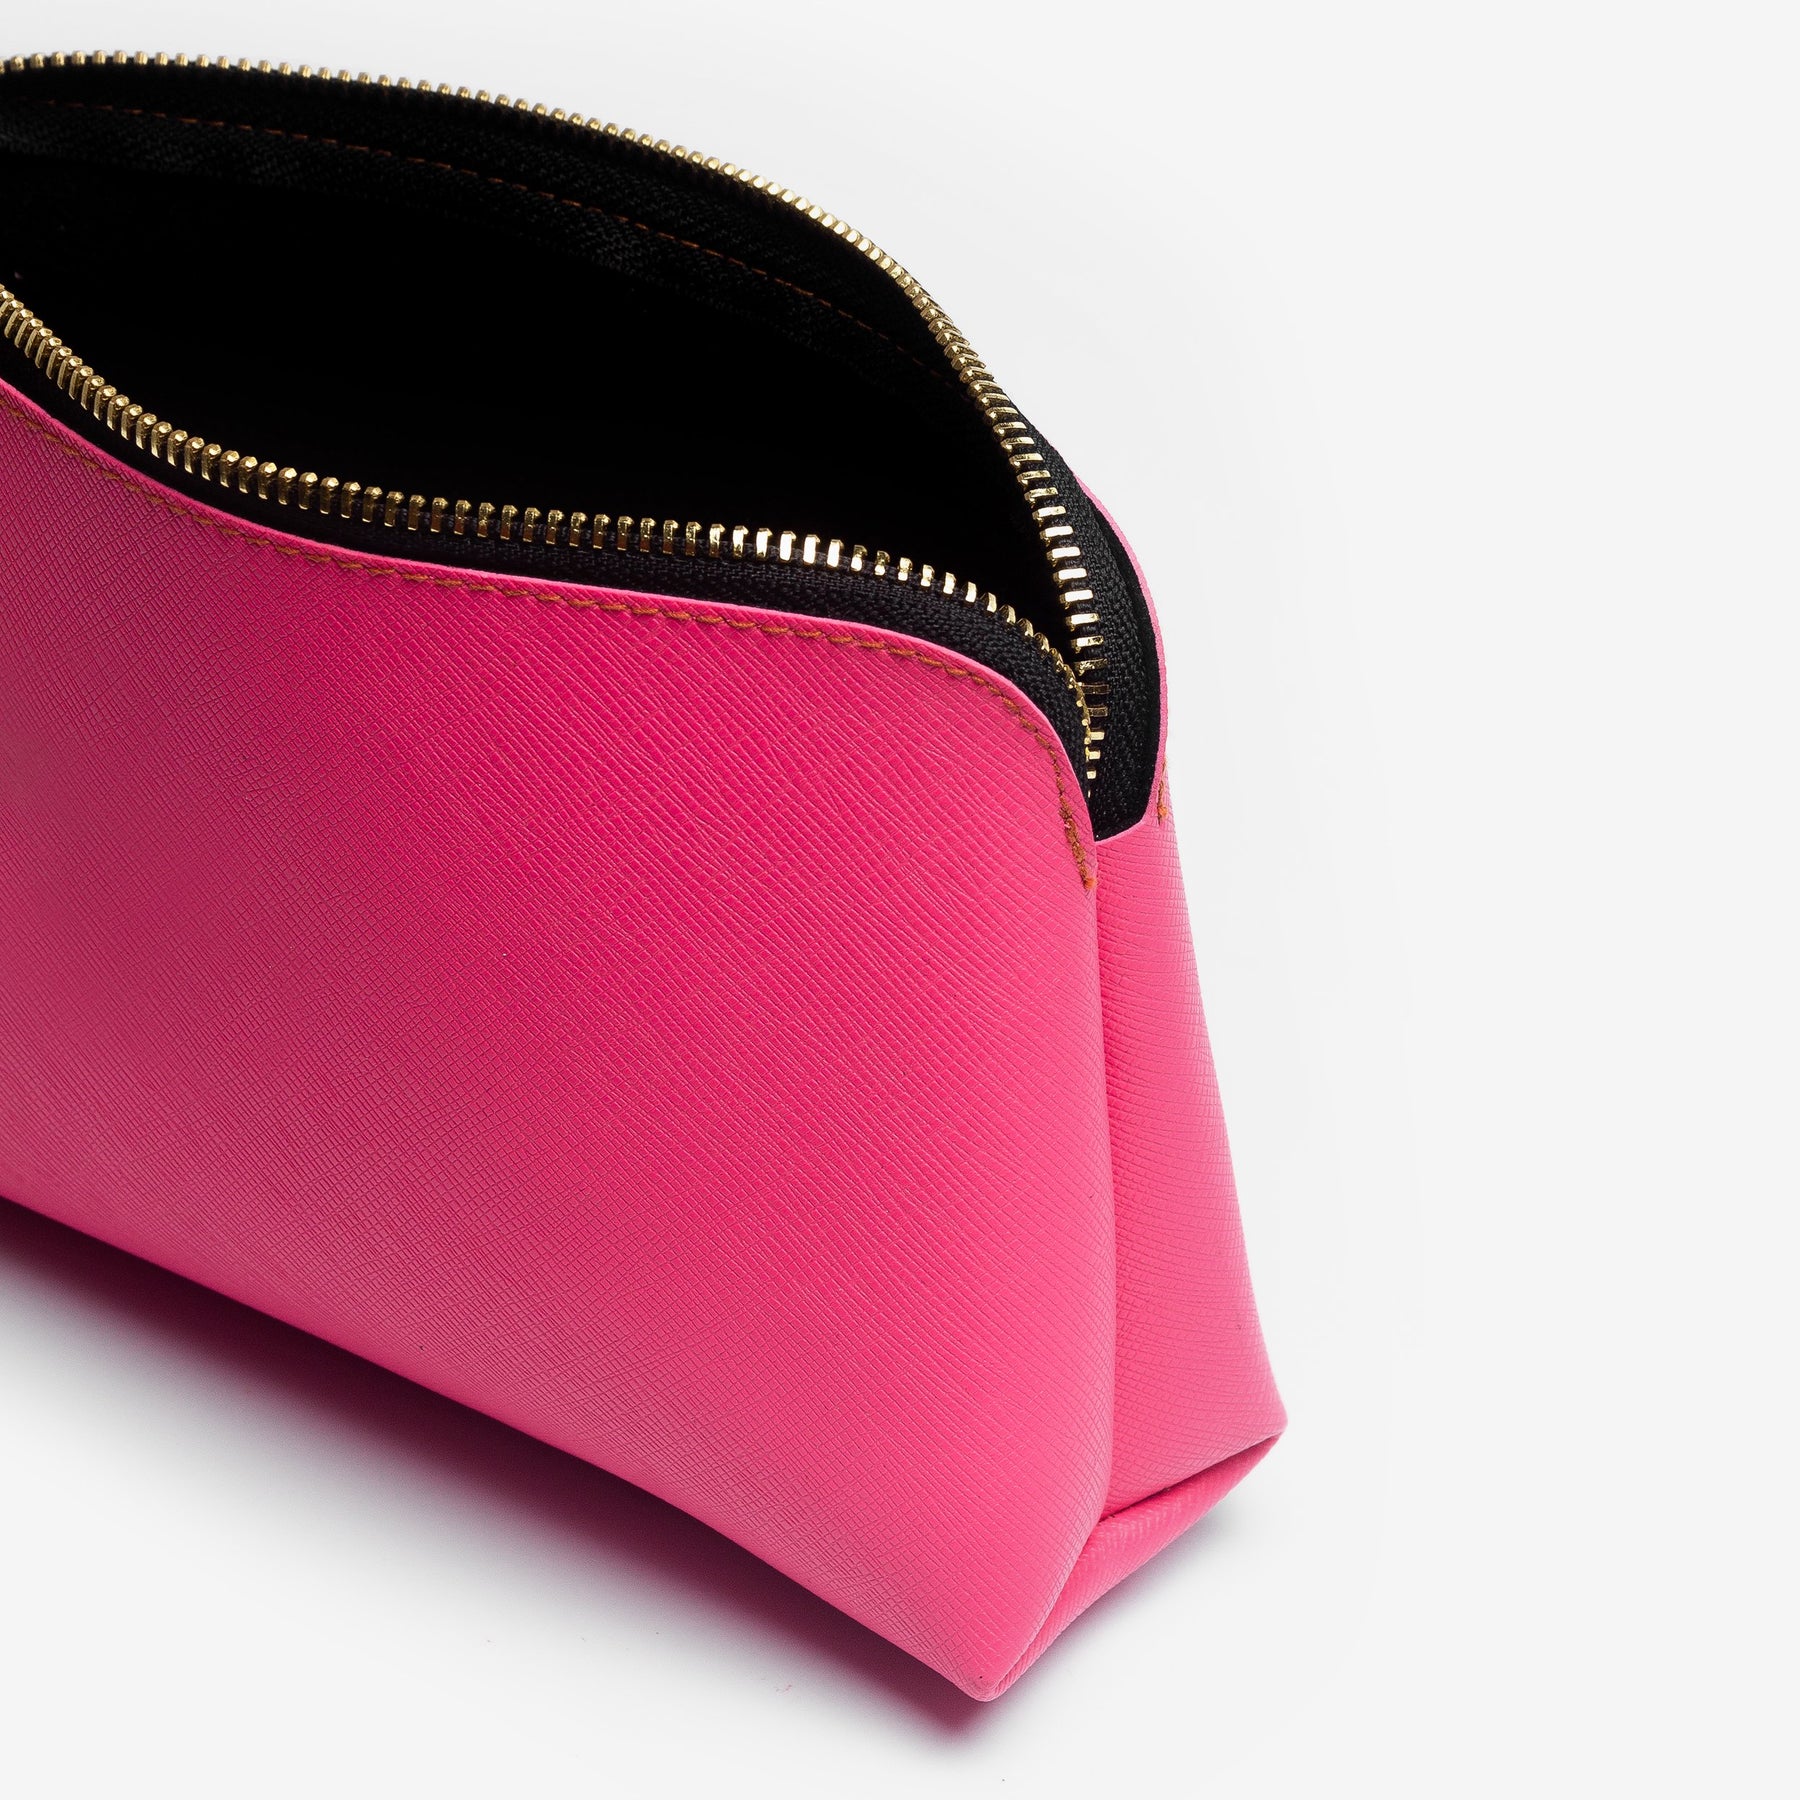 Buy Personalized Pink Makeup Bags Online